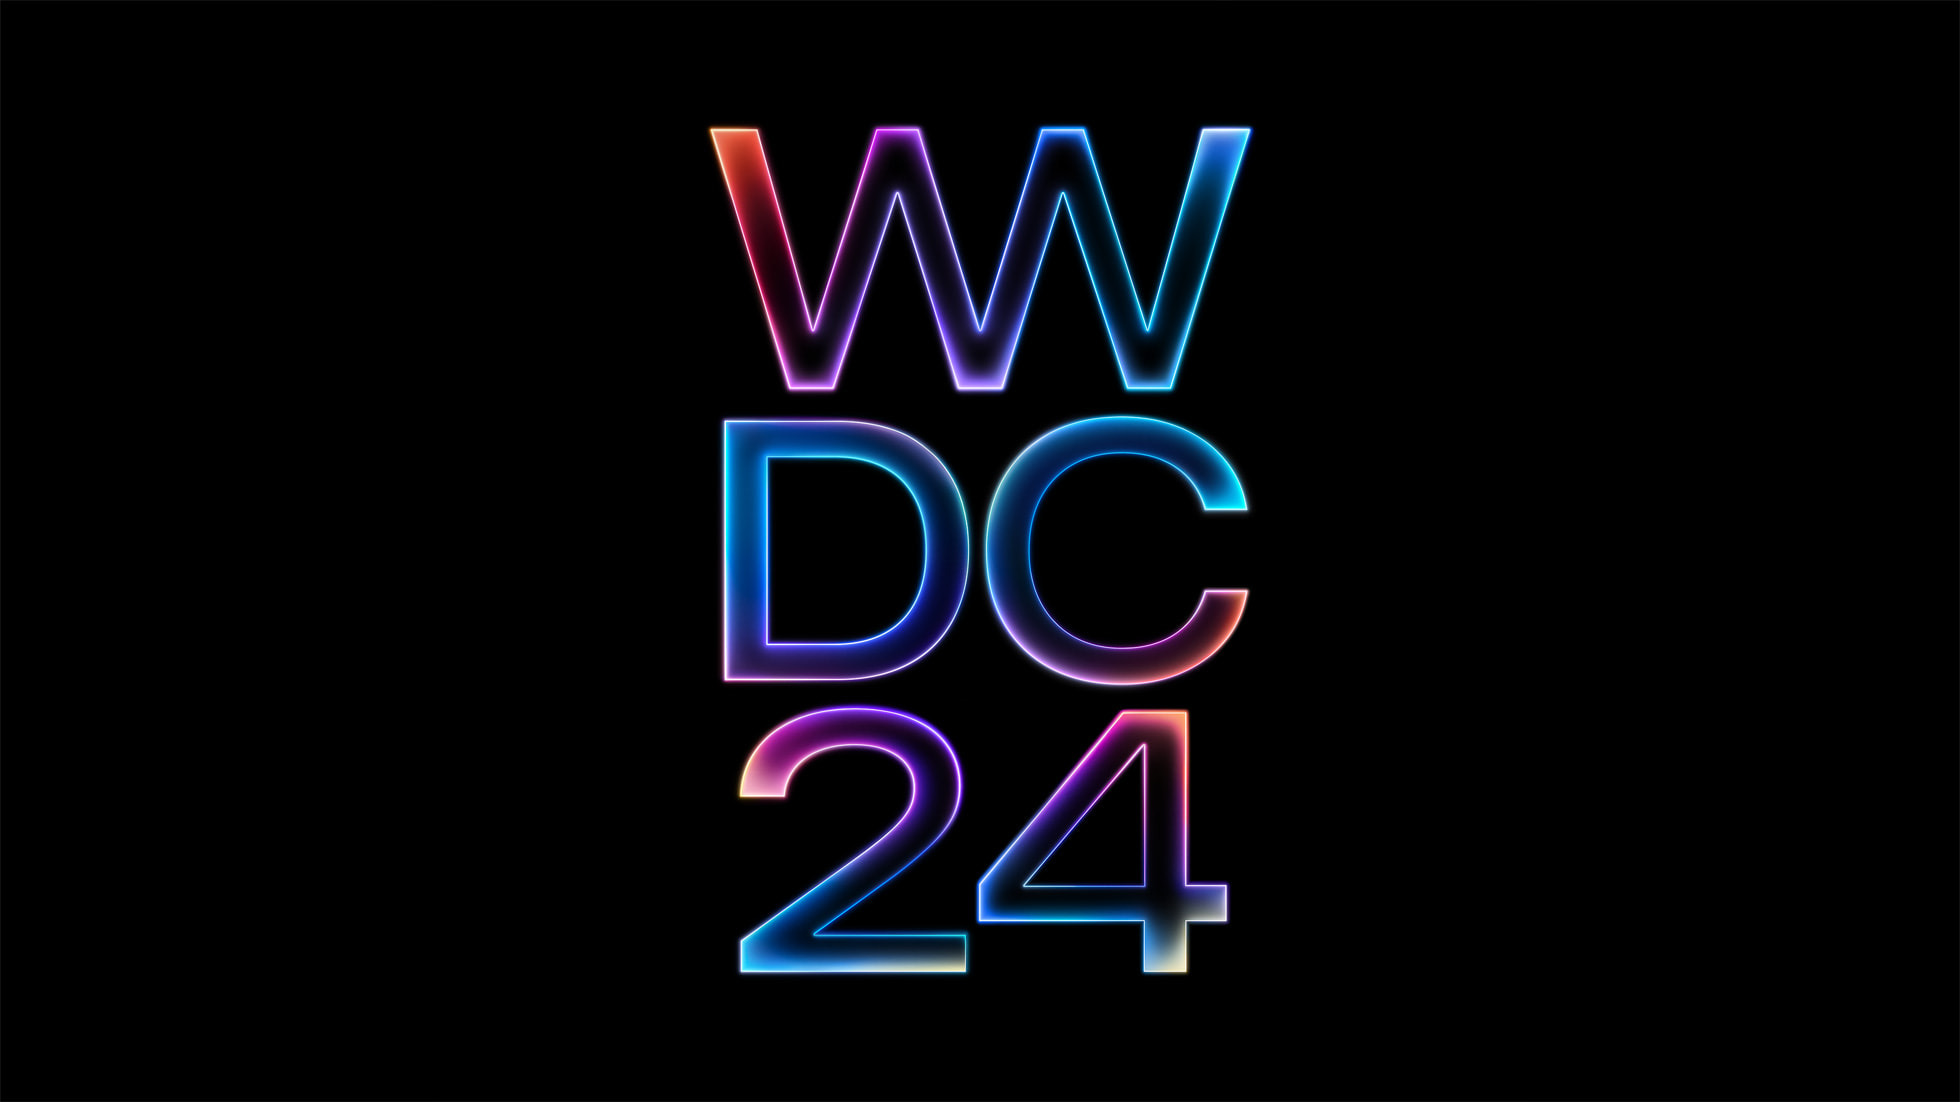 iOS 18 will be unveiled at WWDC 24 on June 10 along with other news

